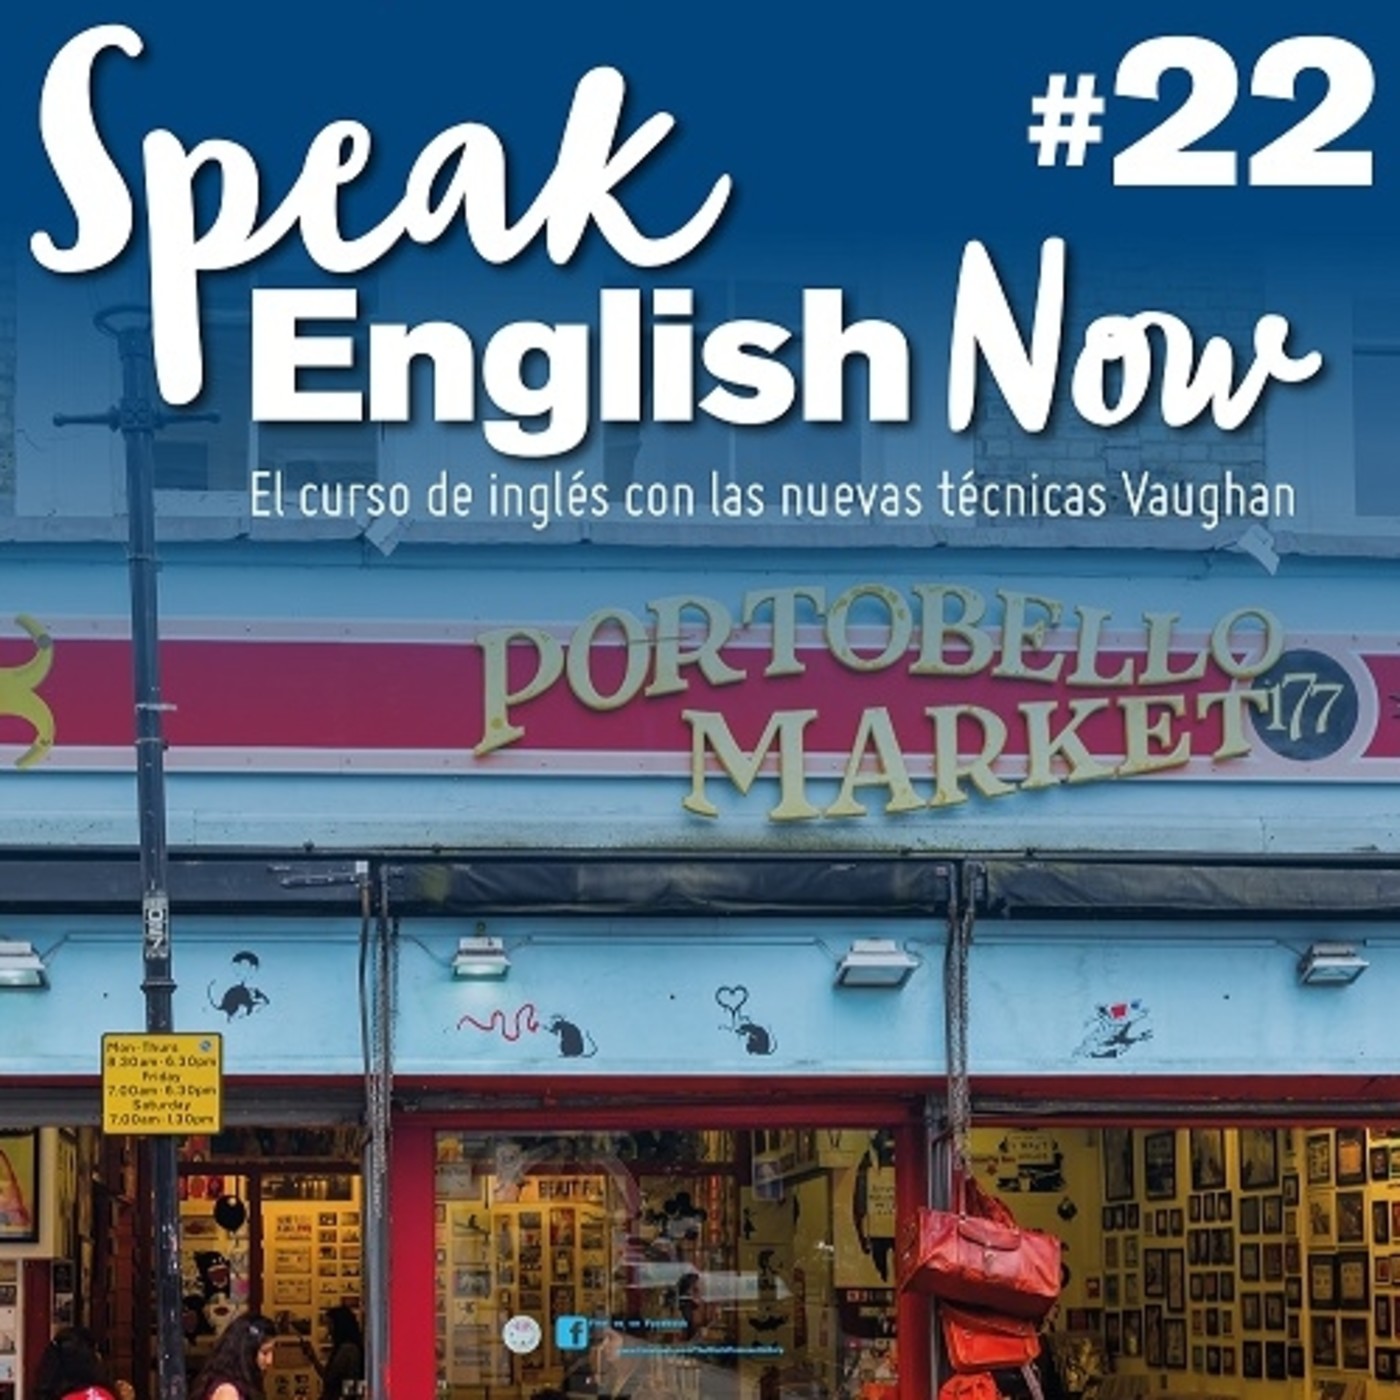 Speak English Now by Vaughan Libro 22